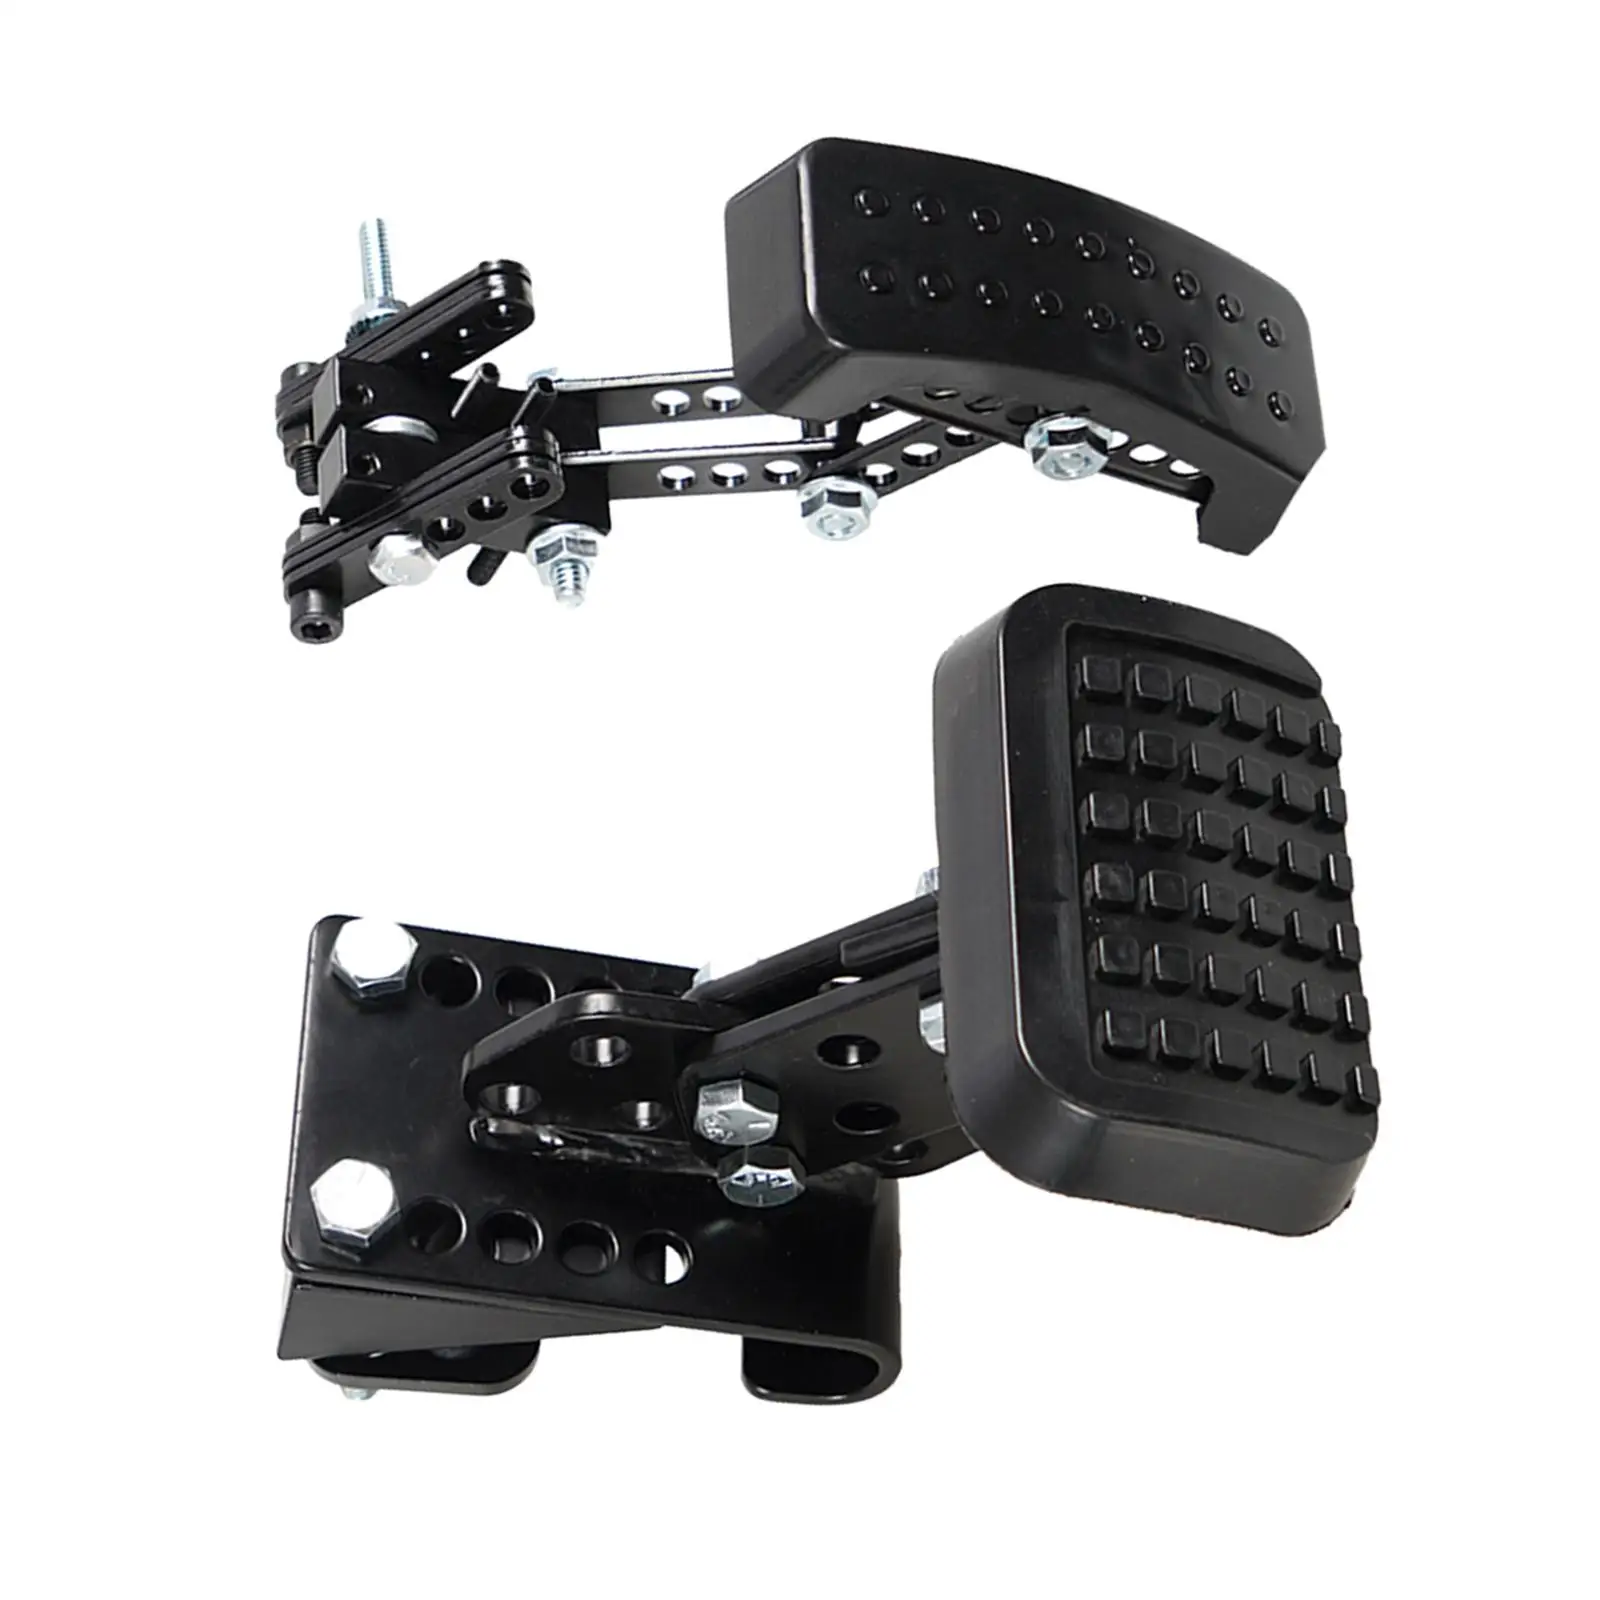 Universal Brake and Pedals Extender car Anti Slip Pedal for Replaces